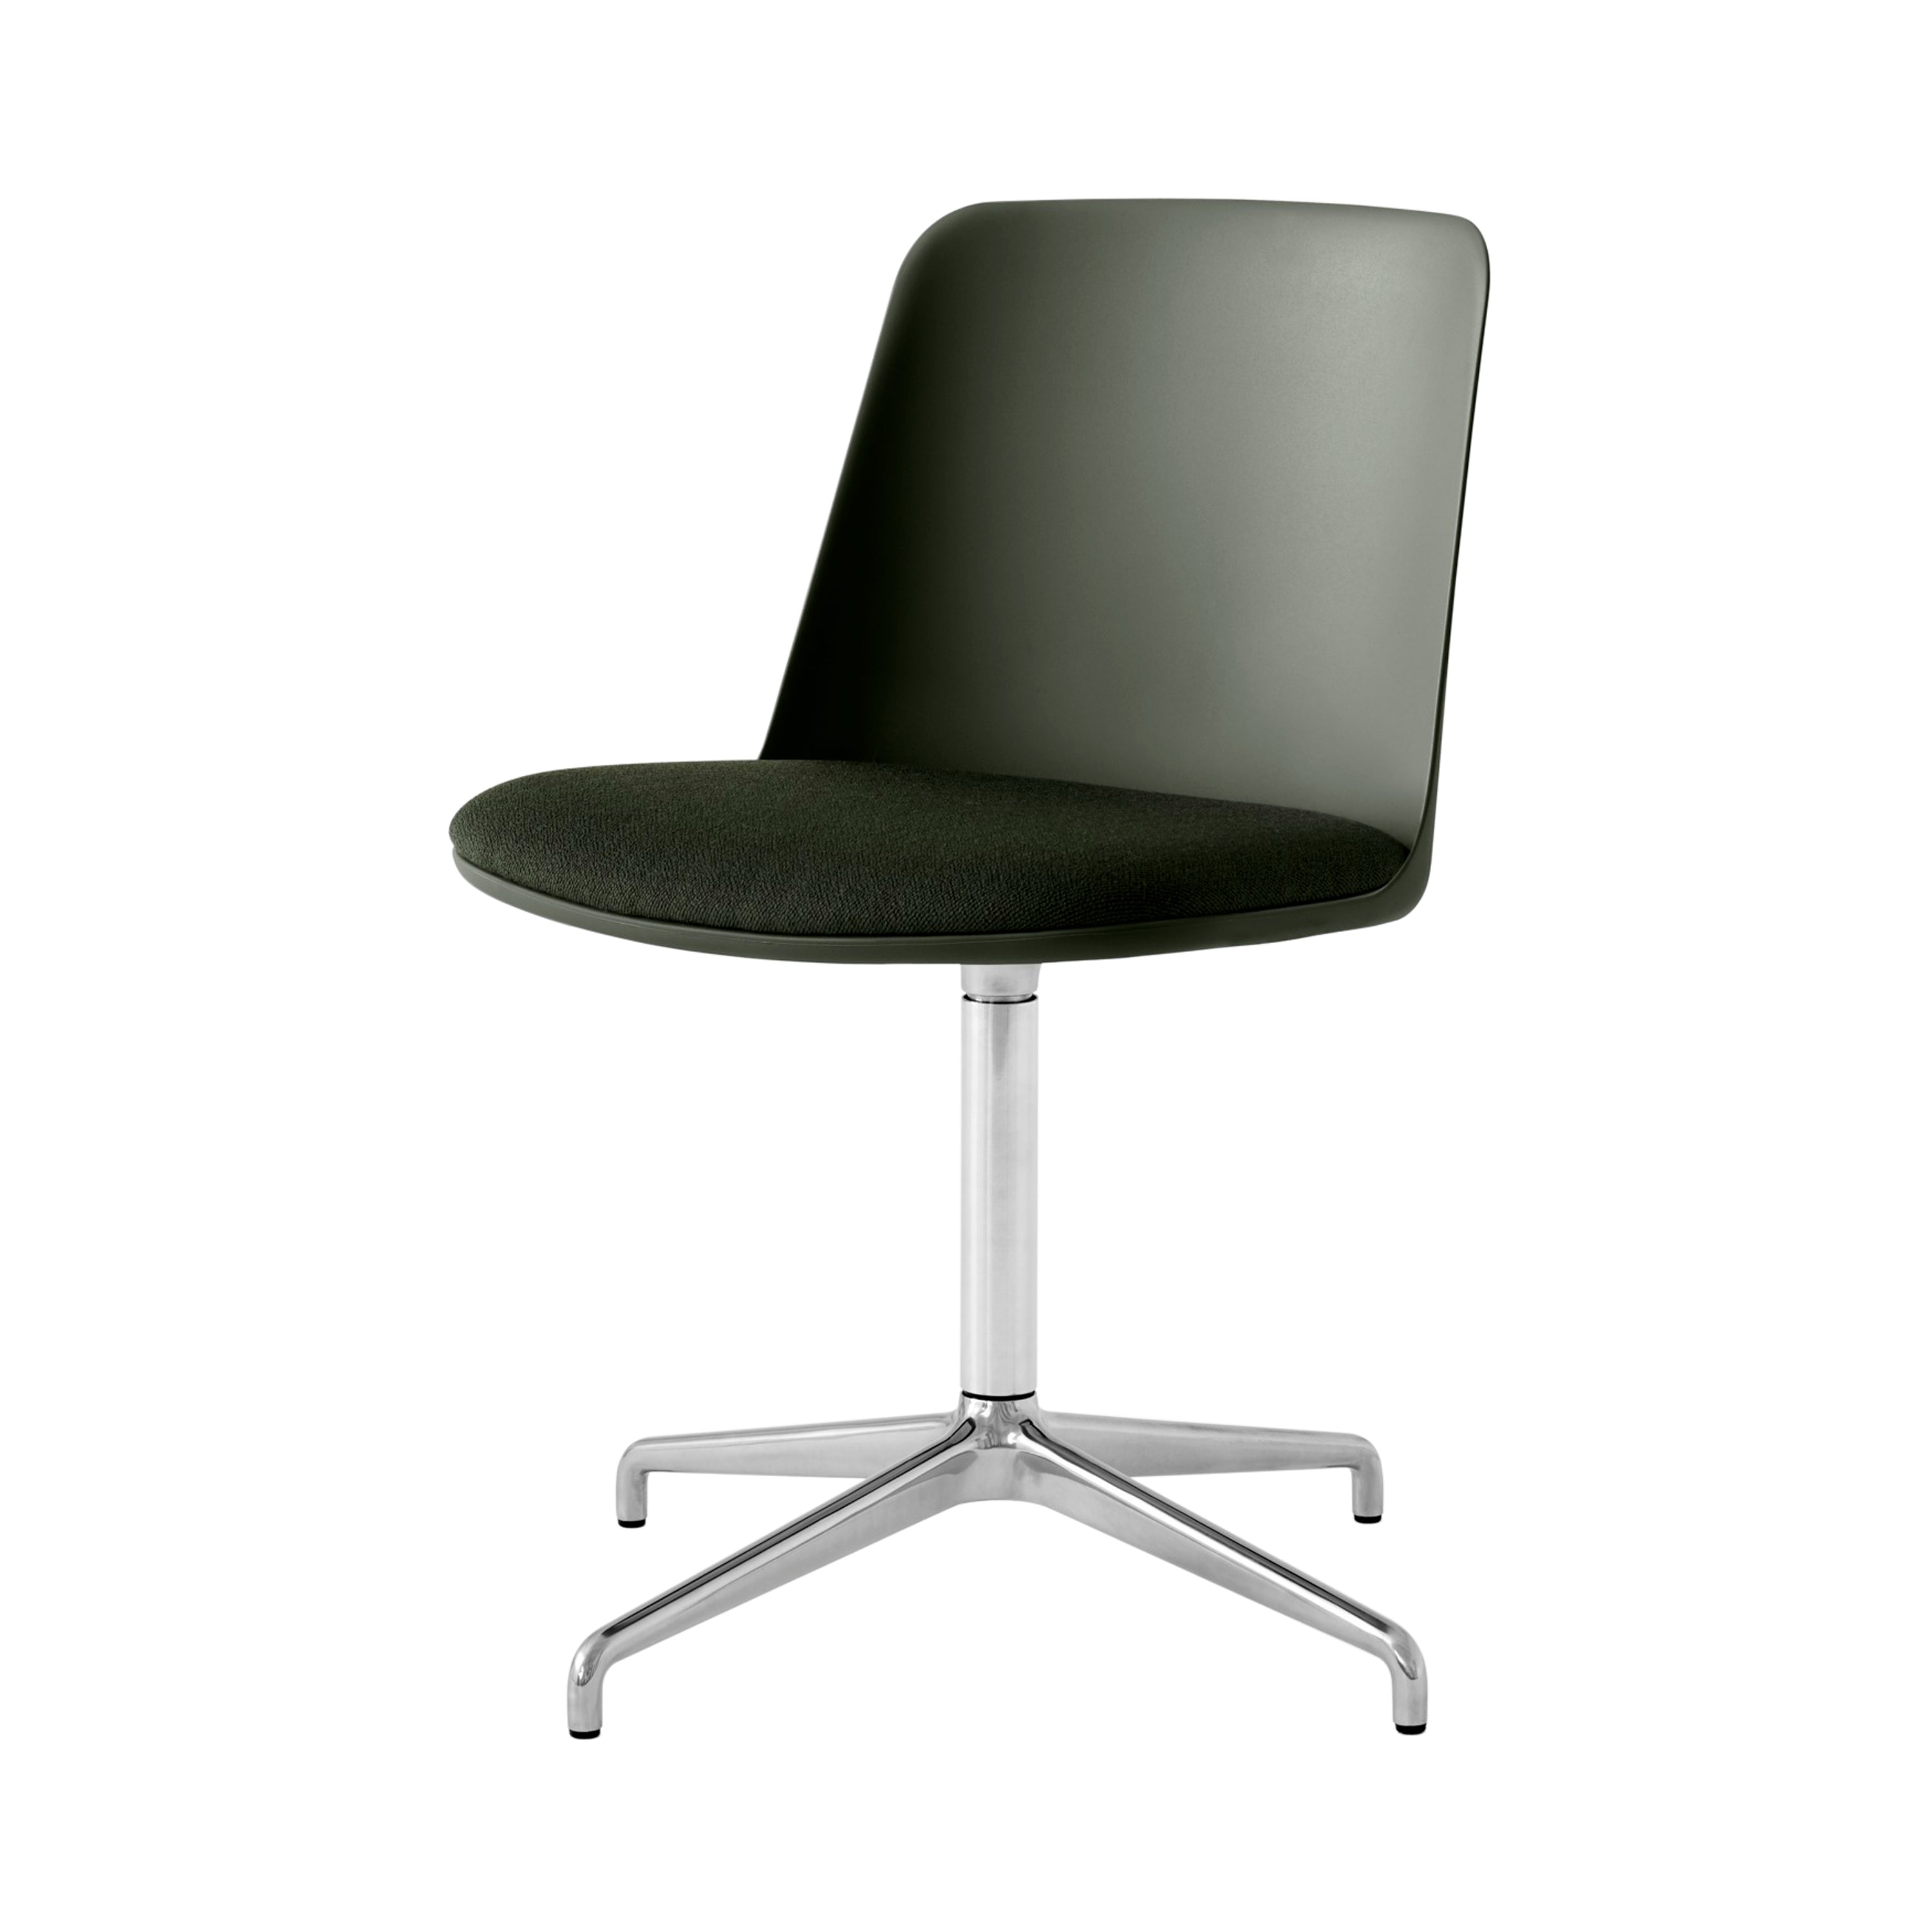 Rely Chair HW17: Polished Aluminum + Bronze Green